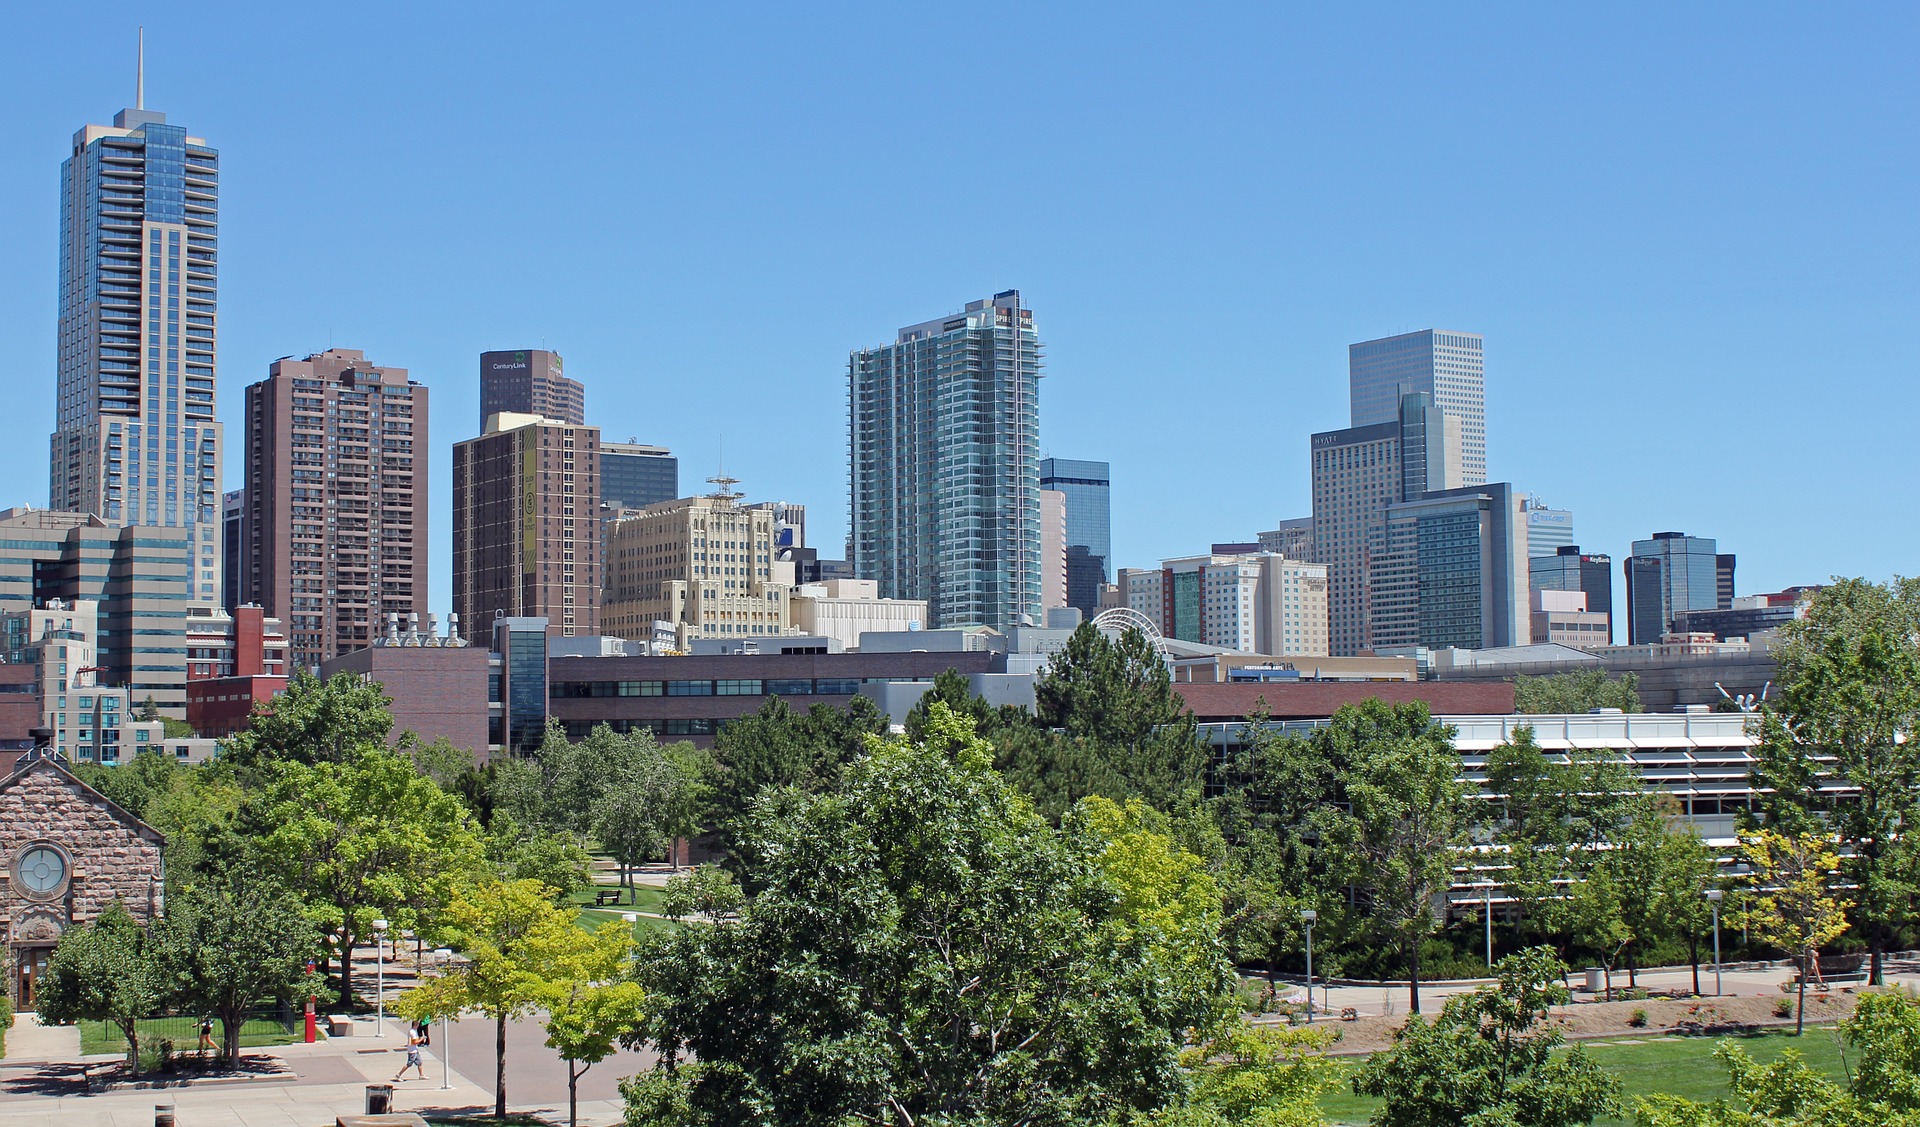 12 Reasons To Visit The Mile High City, Denver, Colorado